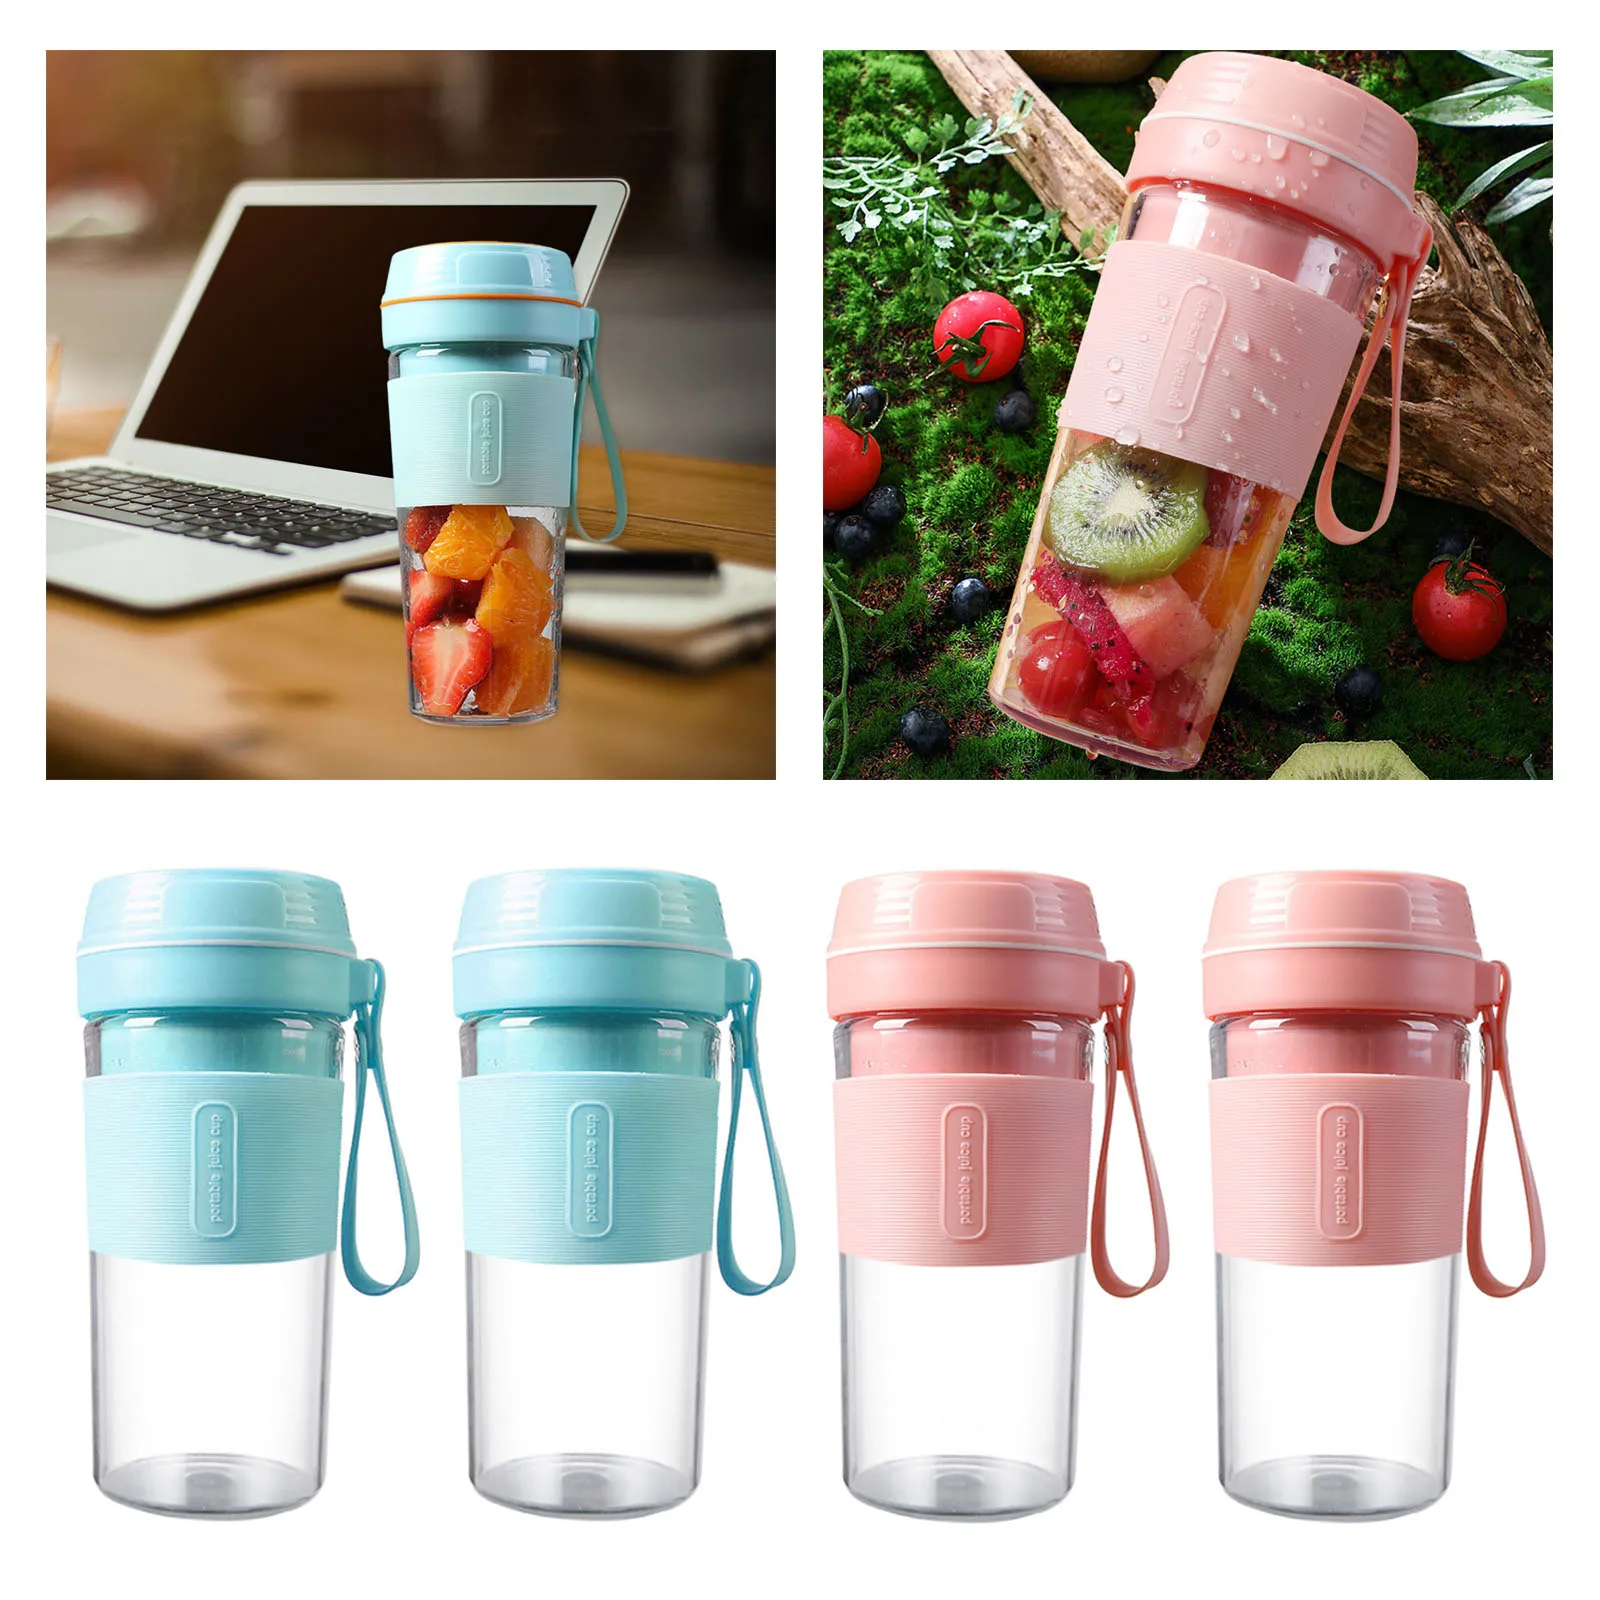 270ml Portable Electric Fruit Juicer USB Rechargeable Smoothie Blender Machine Mini Fruit Mixer Cup Juicing Cup